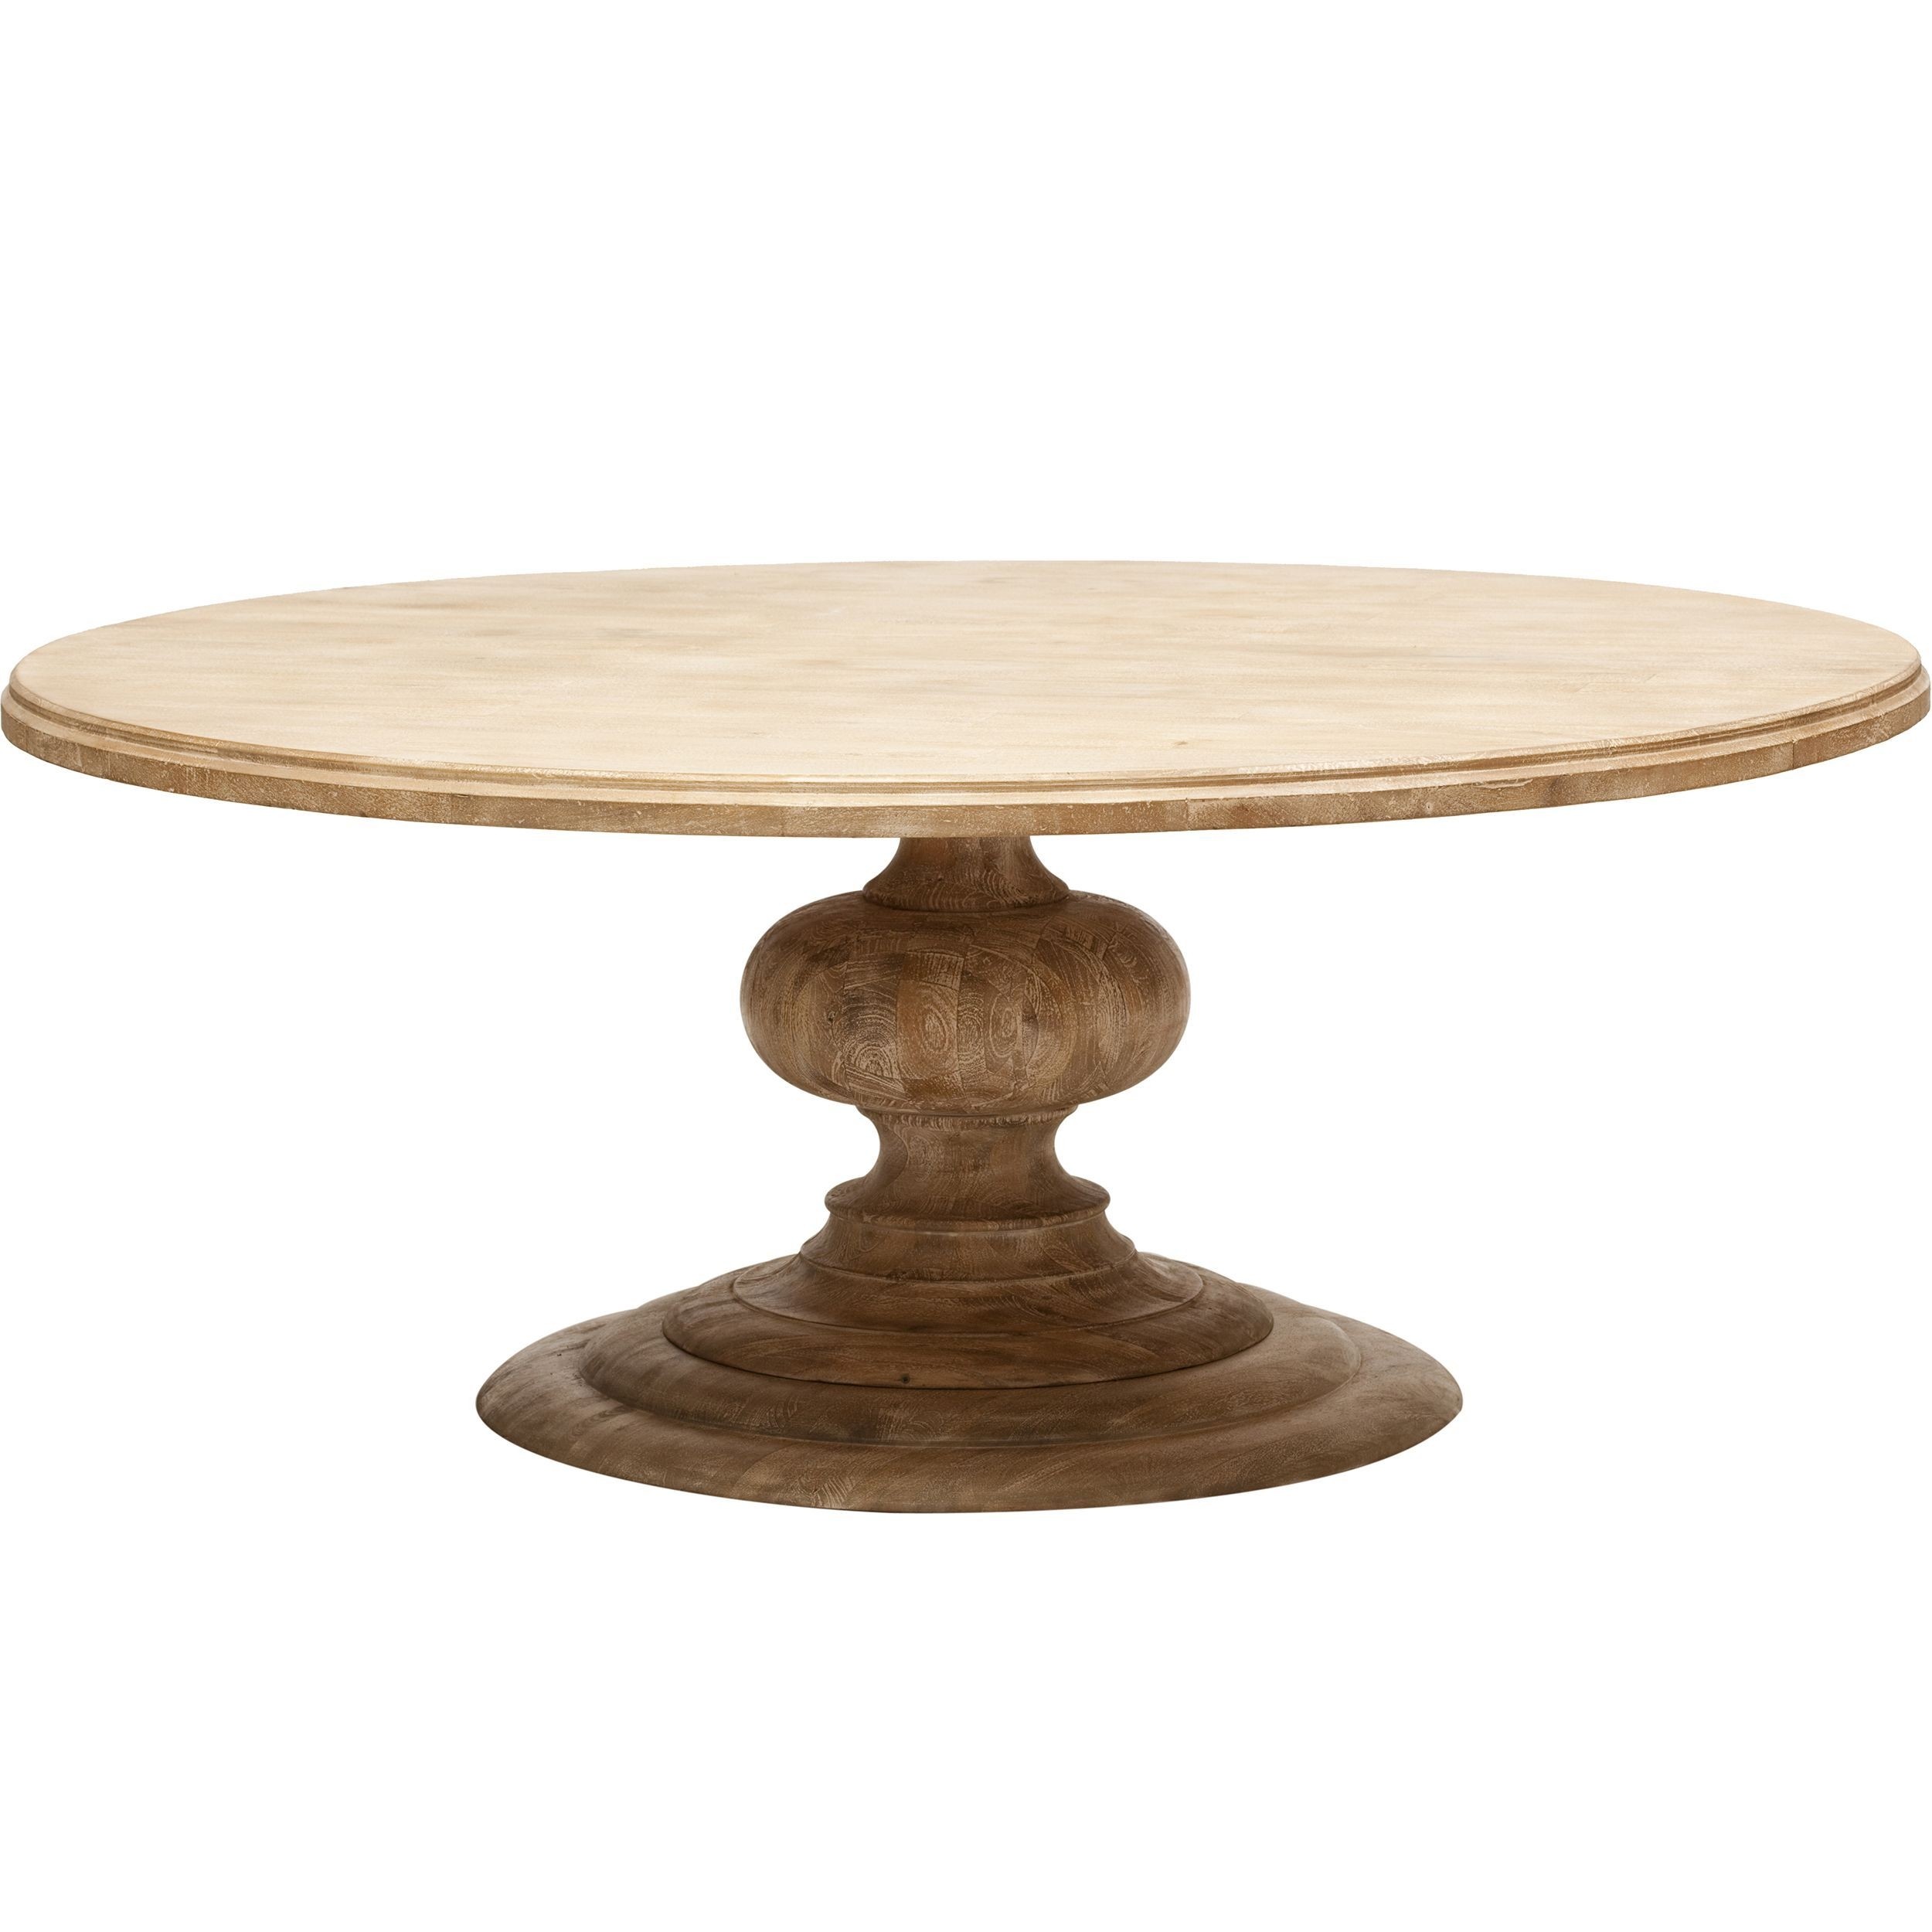 Round dining table seats 10 2